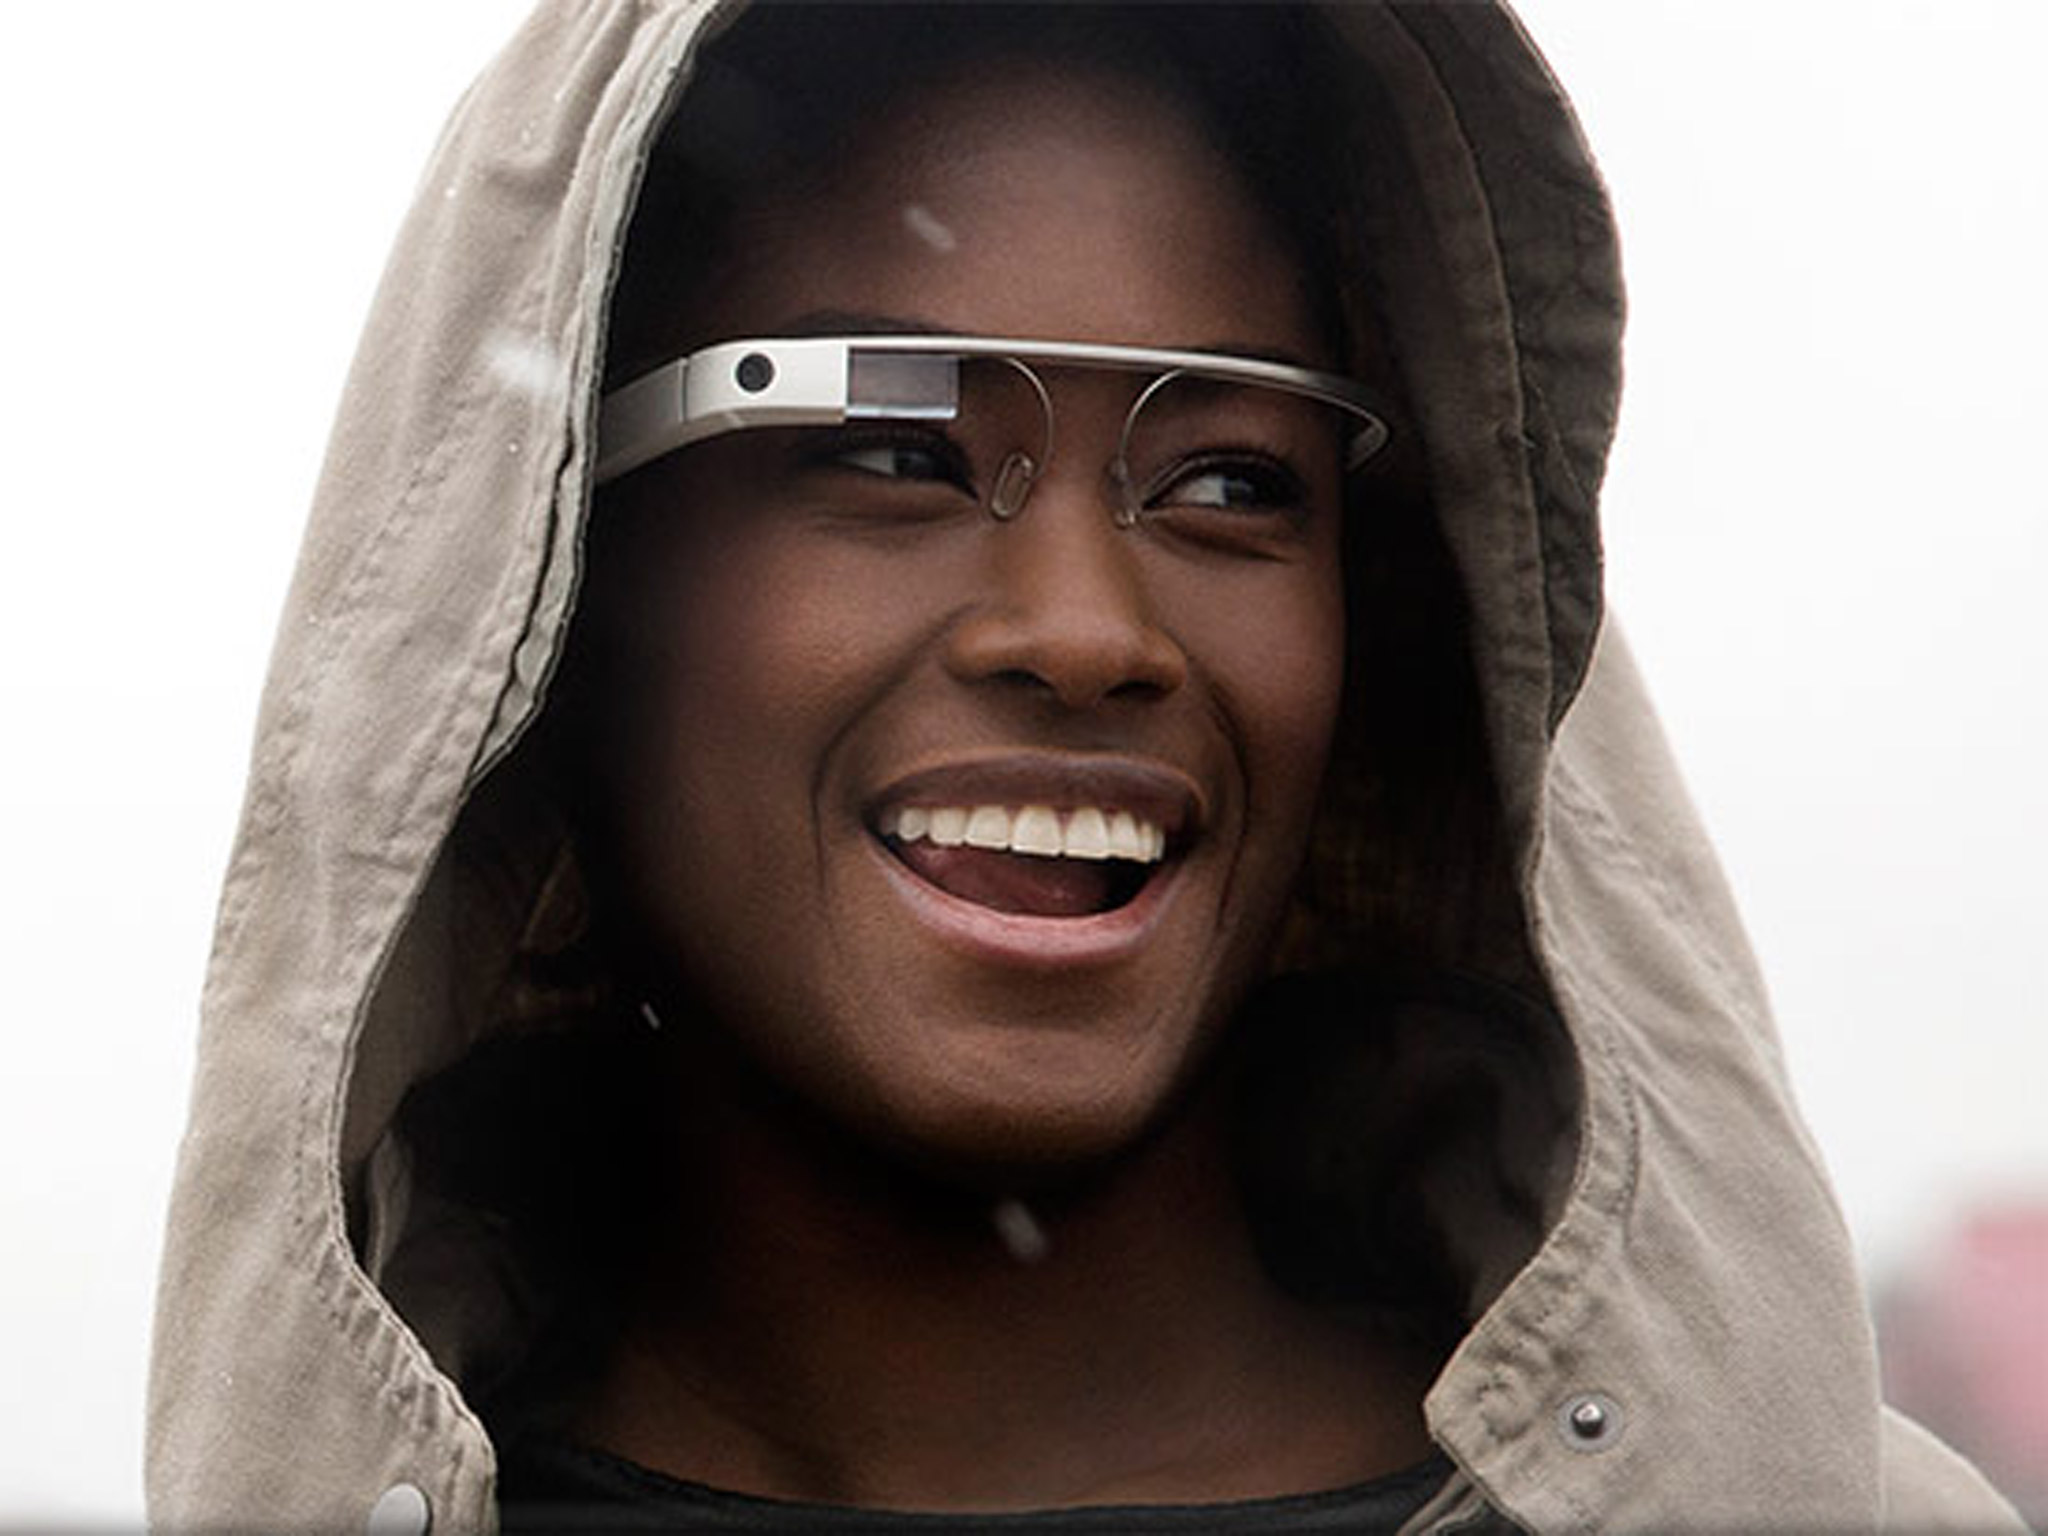 Full matched Google glass and guy